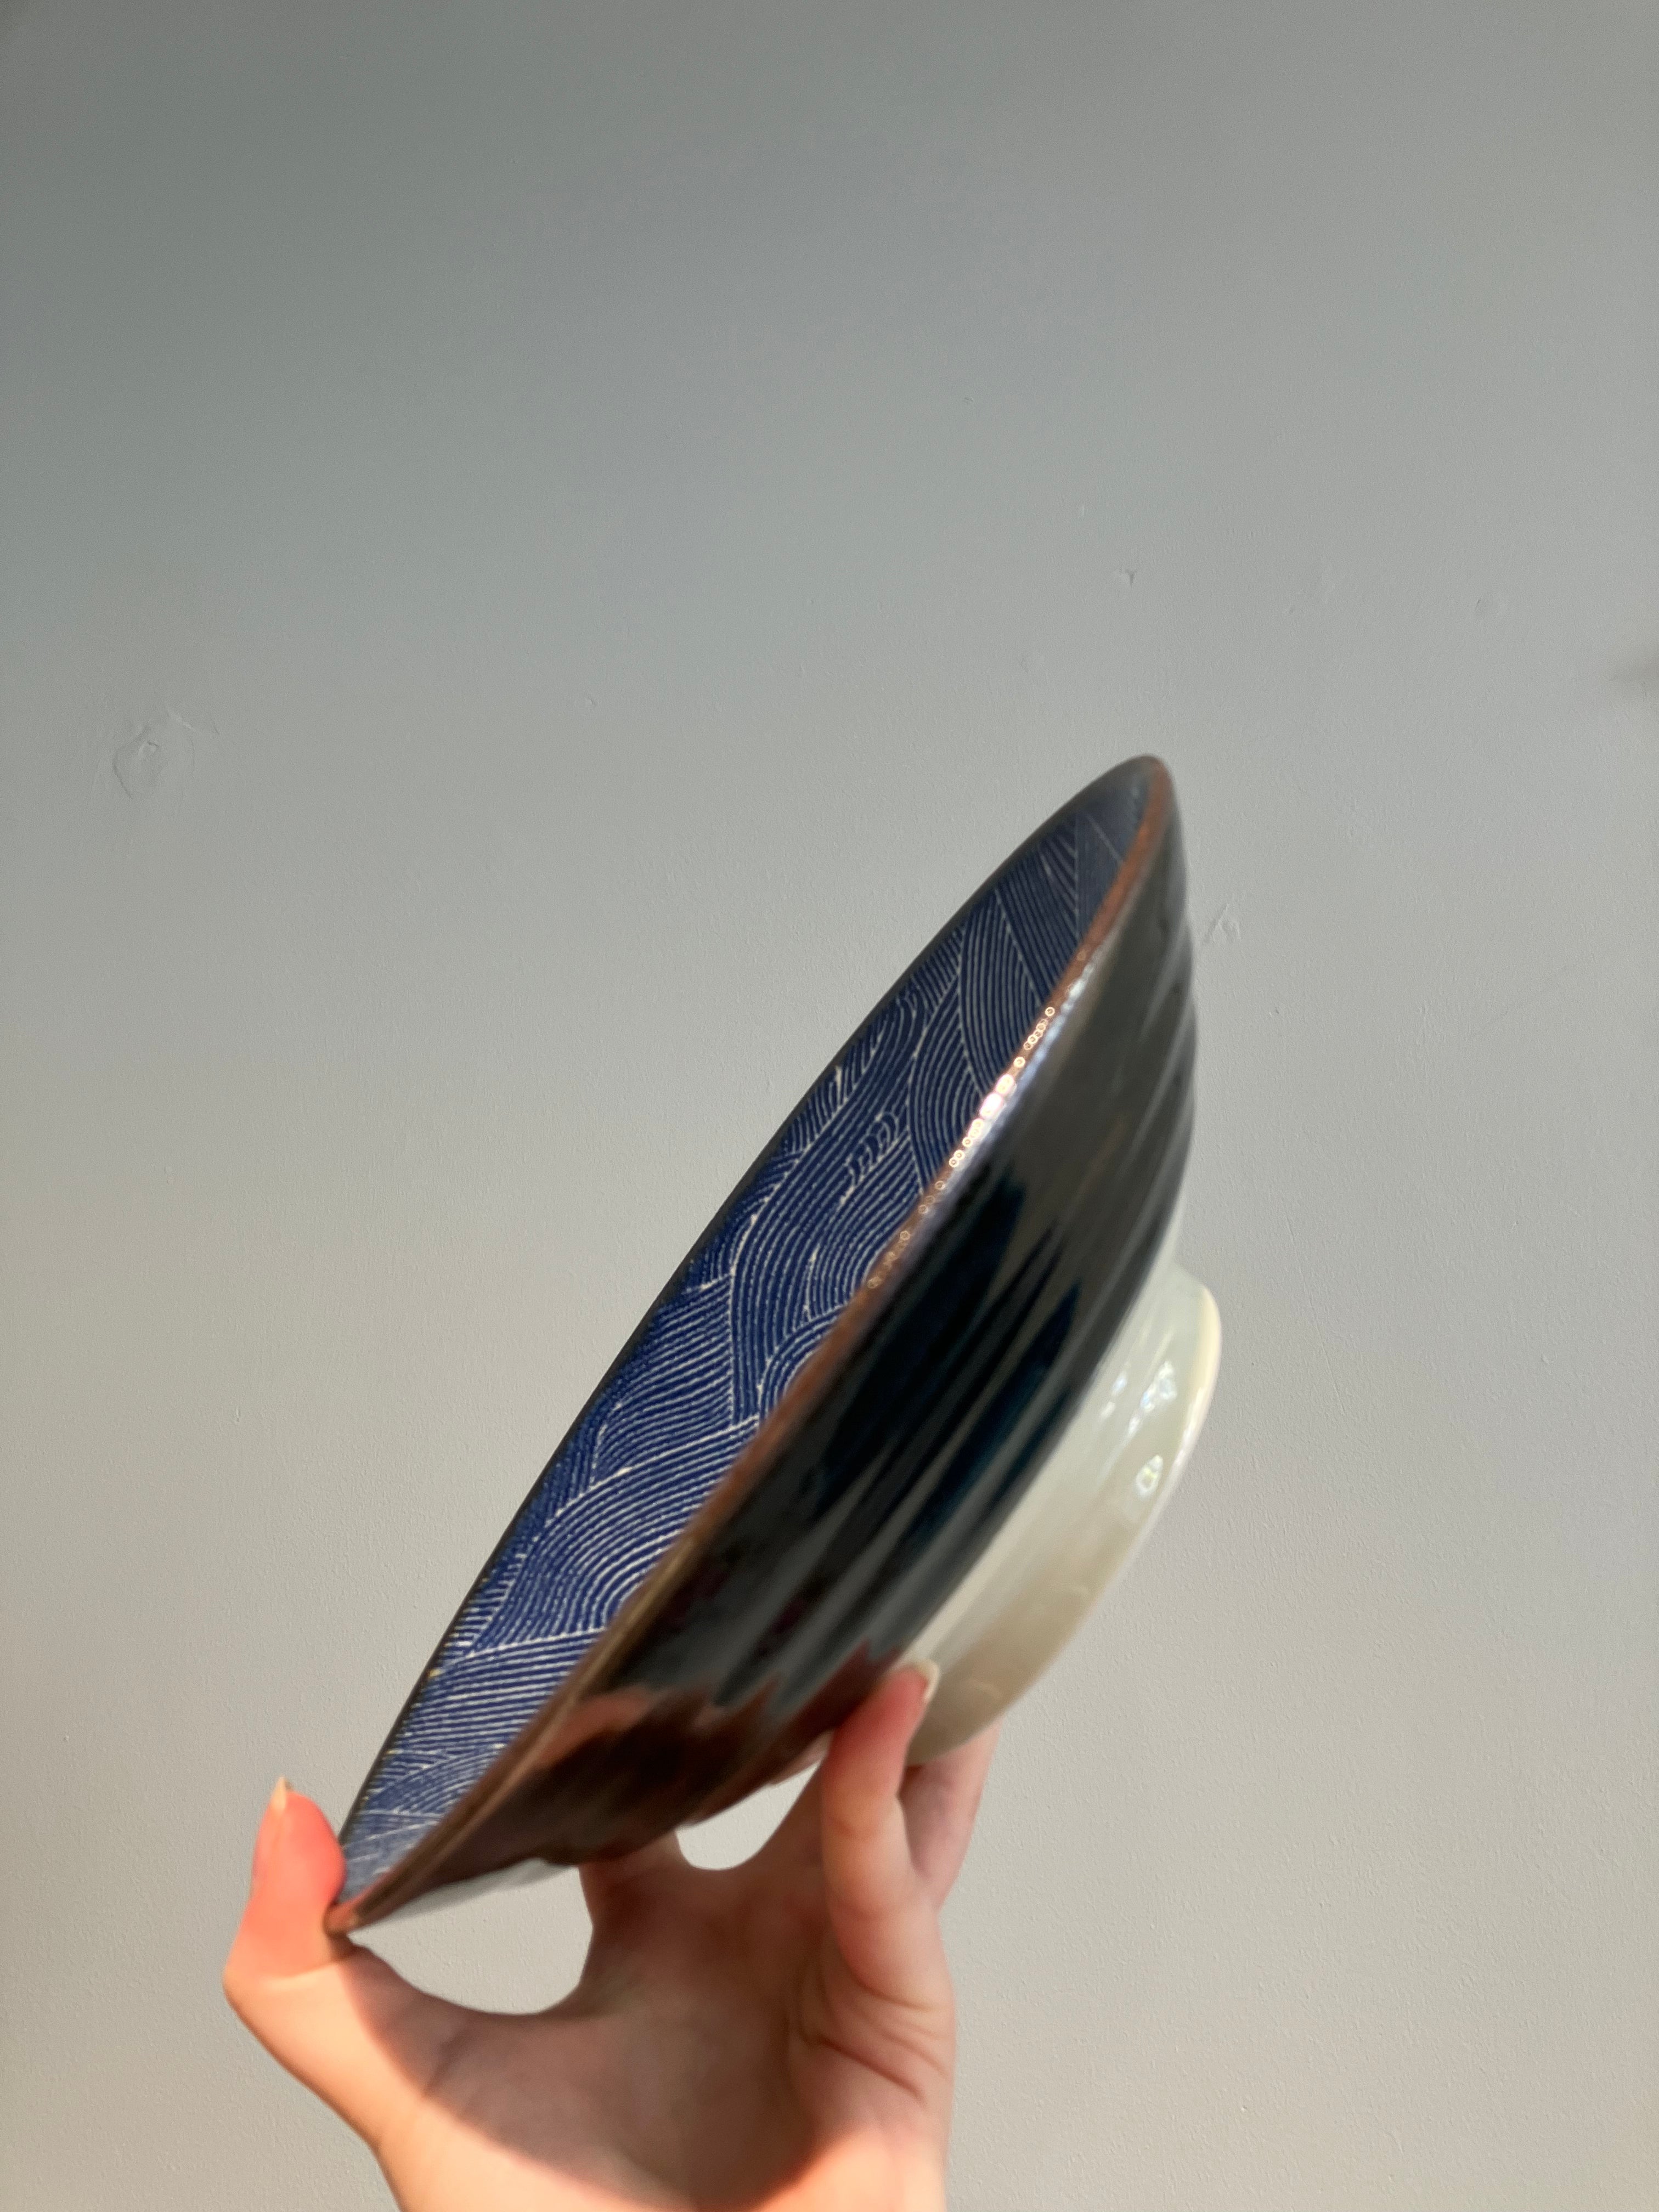 Dish/bowl with blue waves